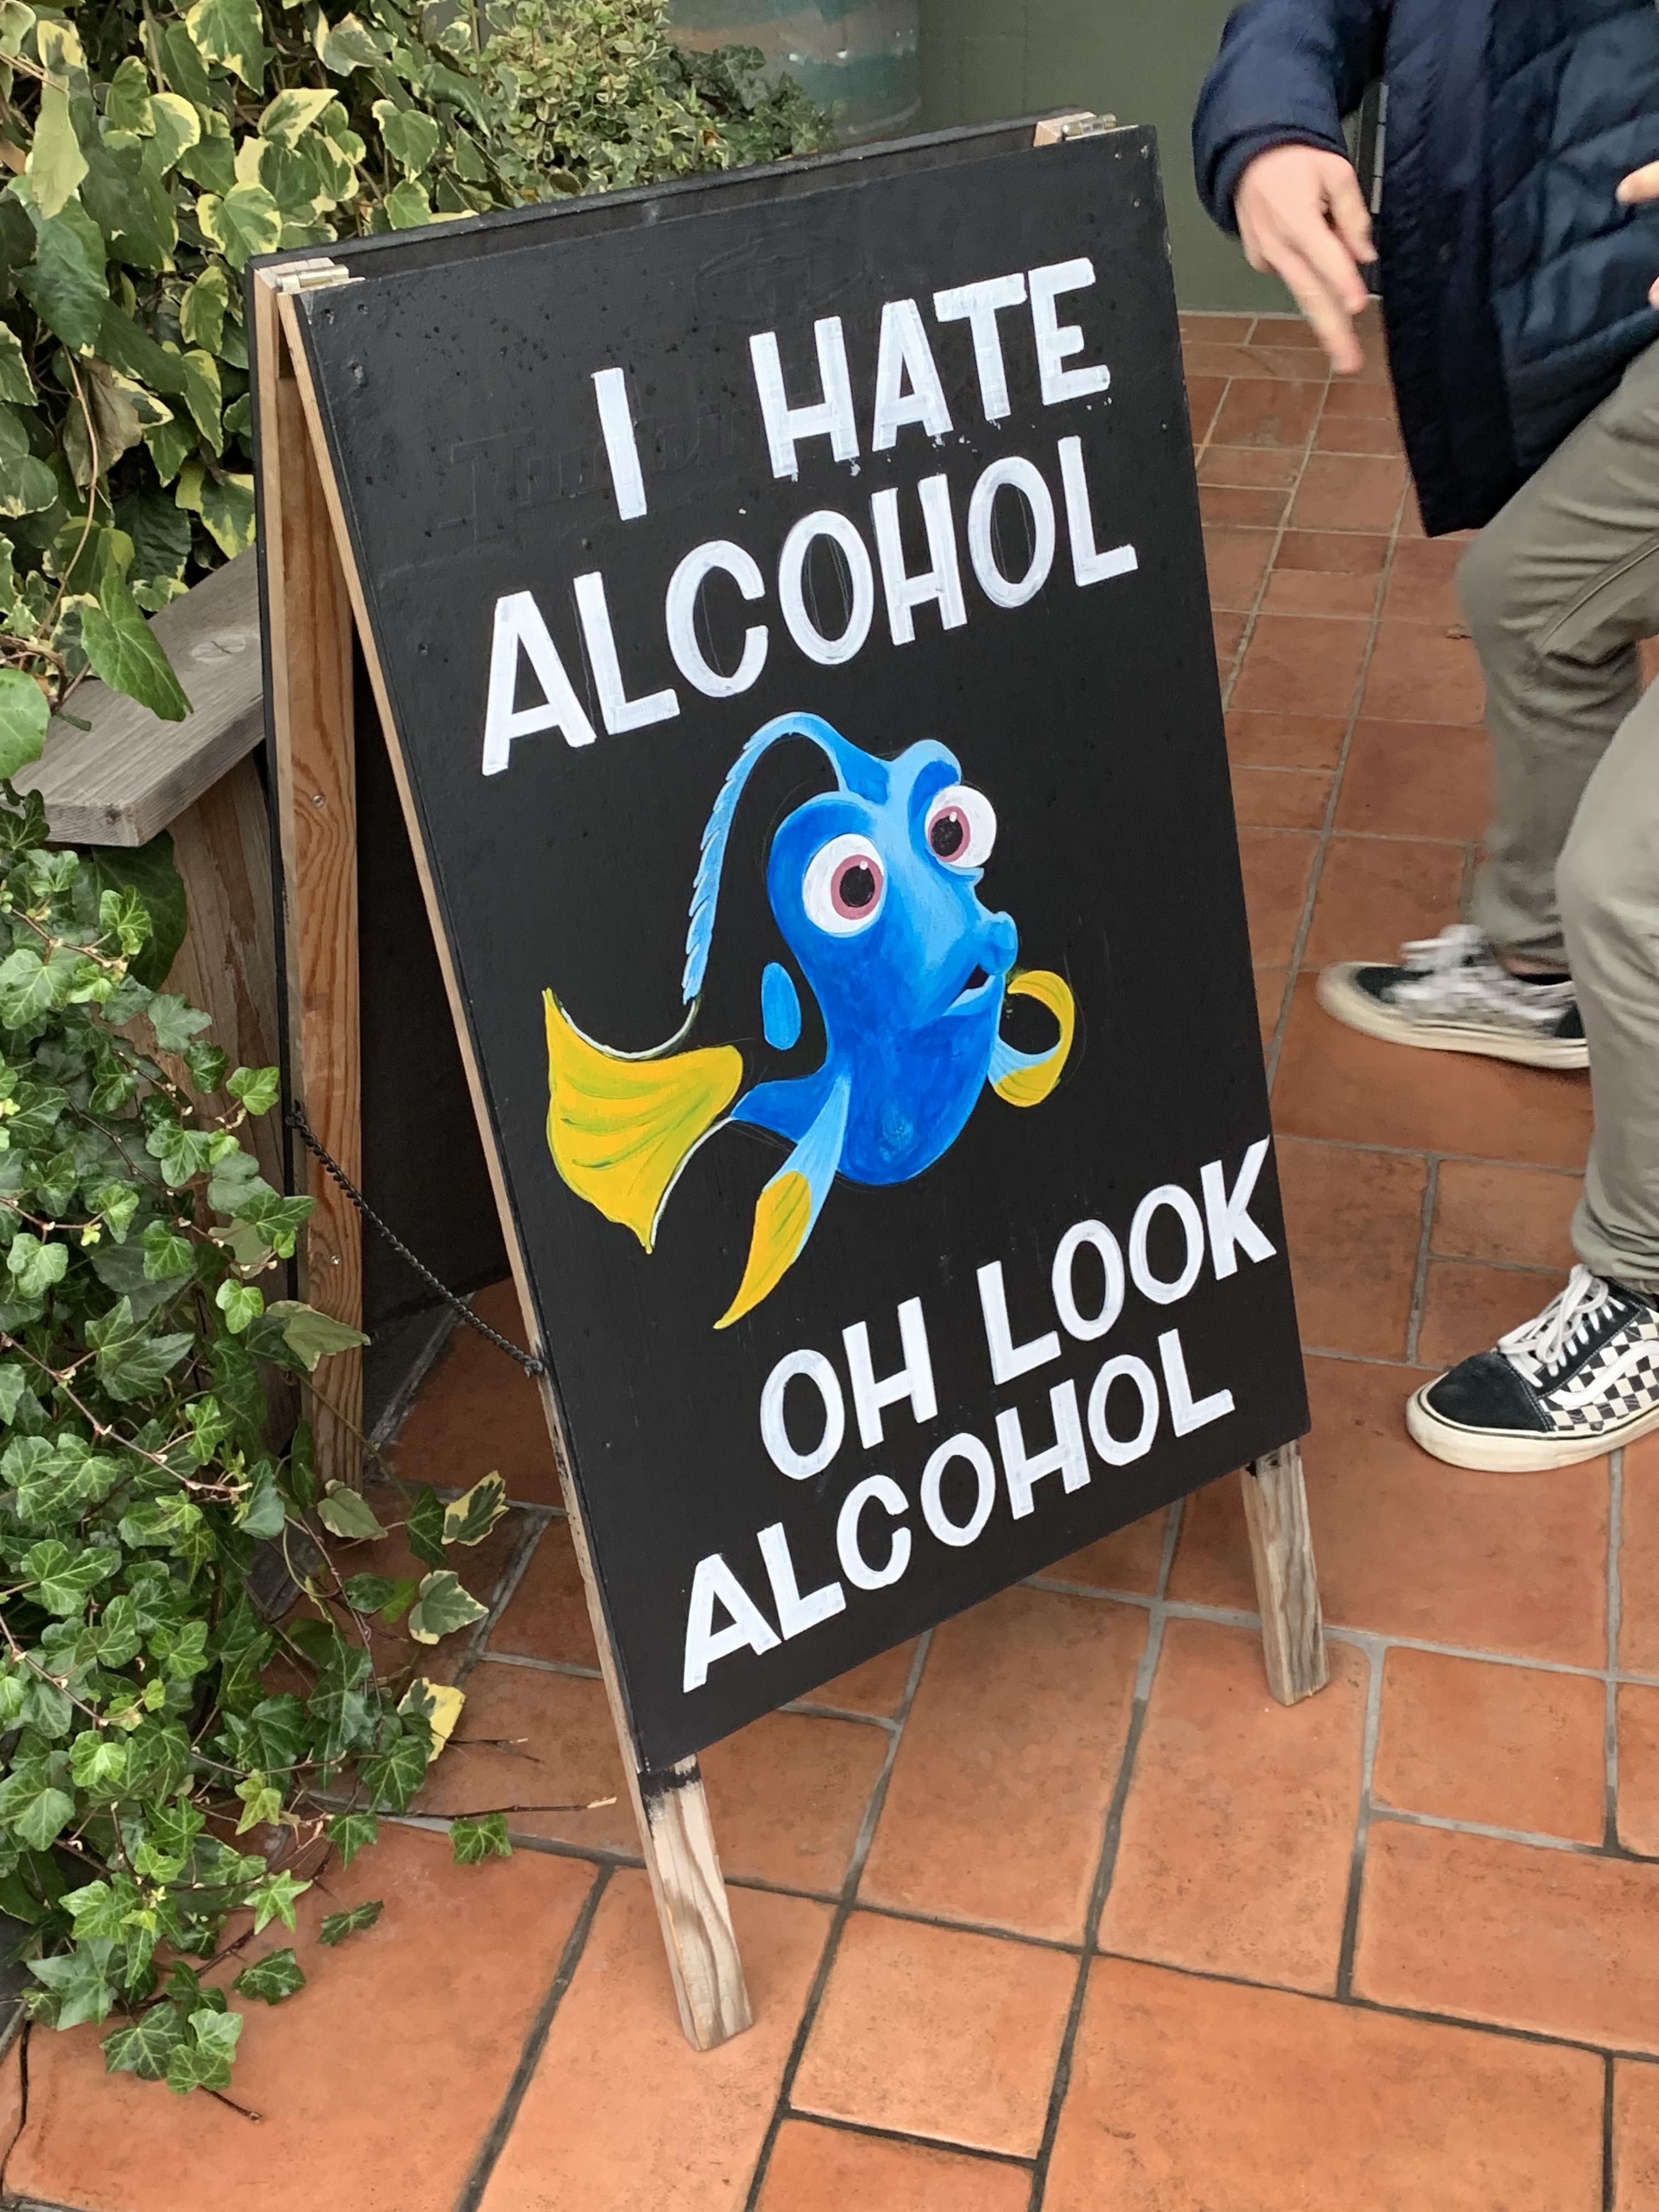 Oh look, alcohol